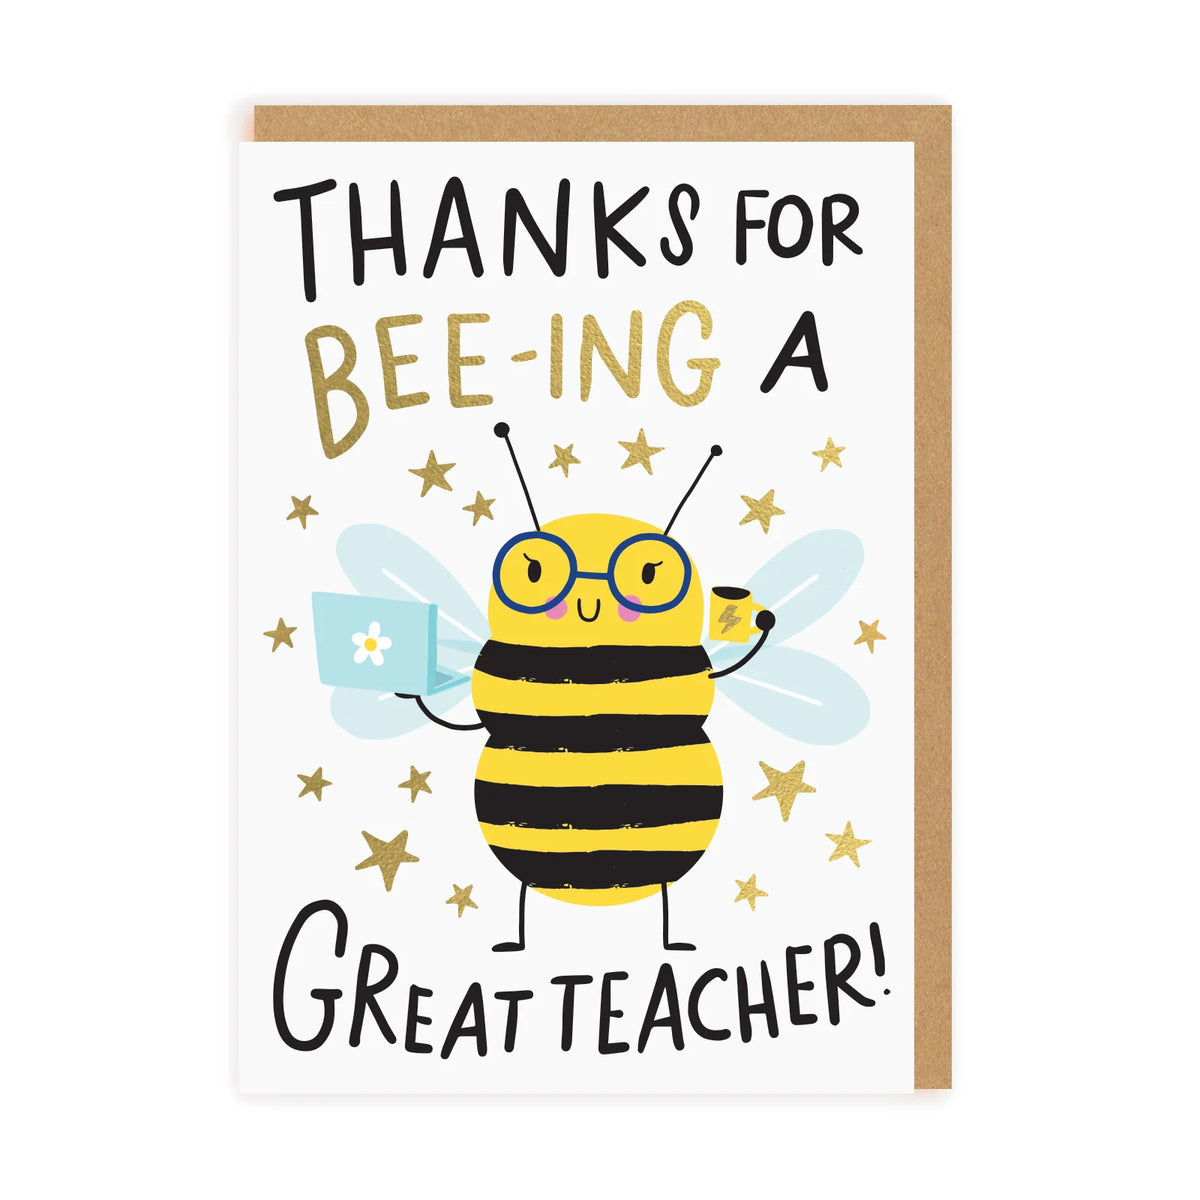 Thanks for Bee-ing a Great Teacher Card